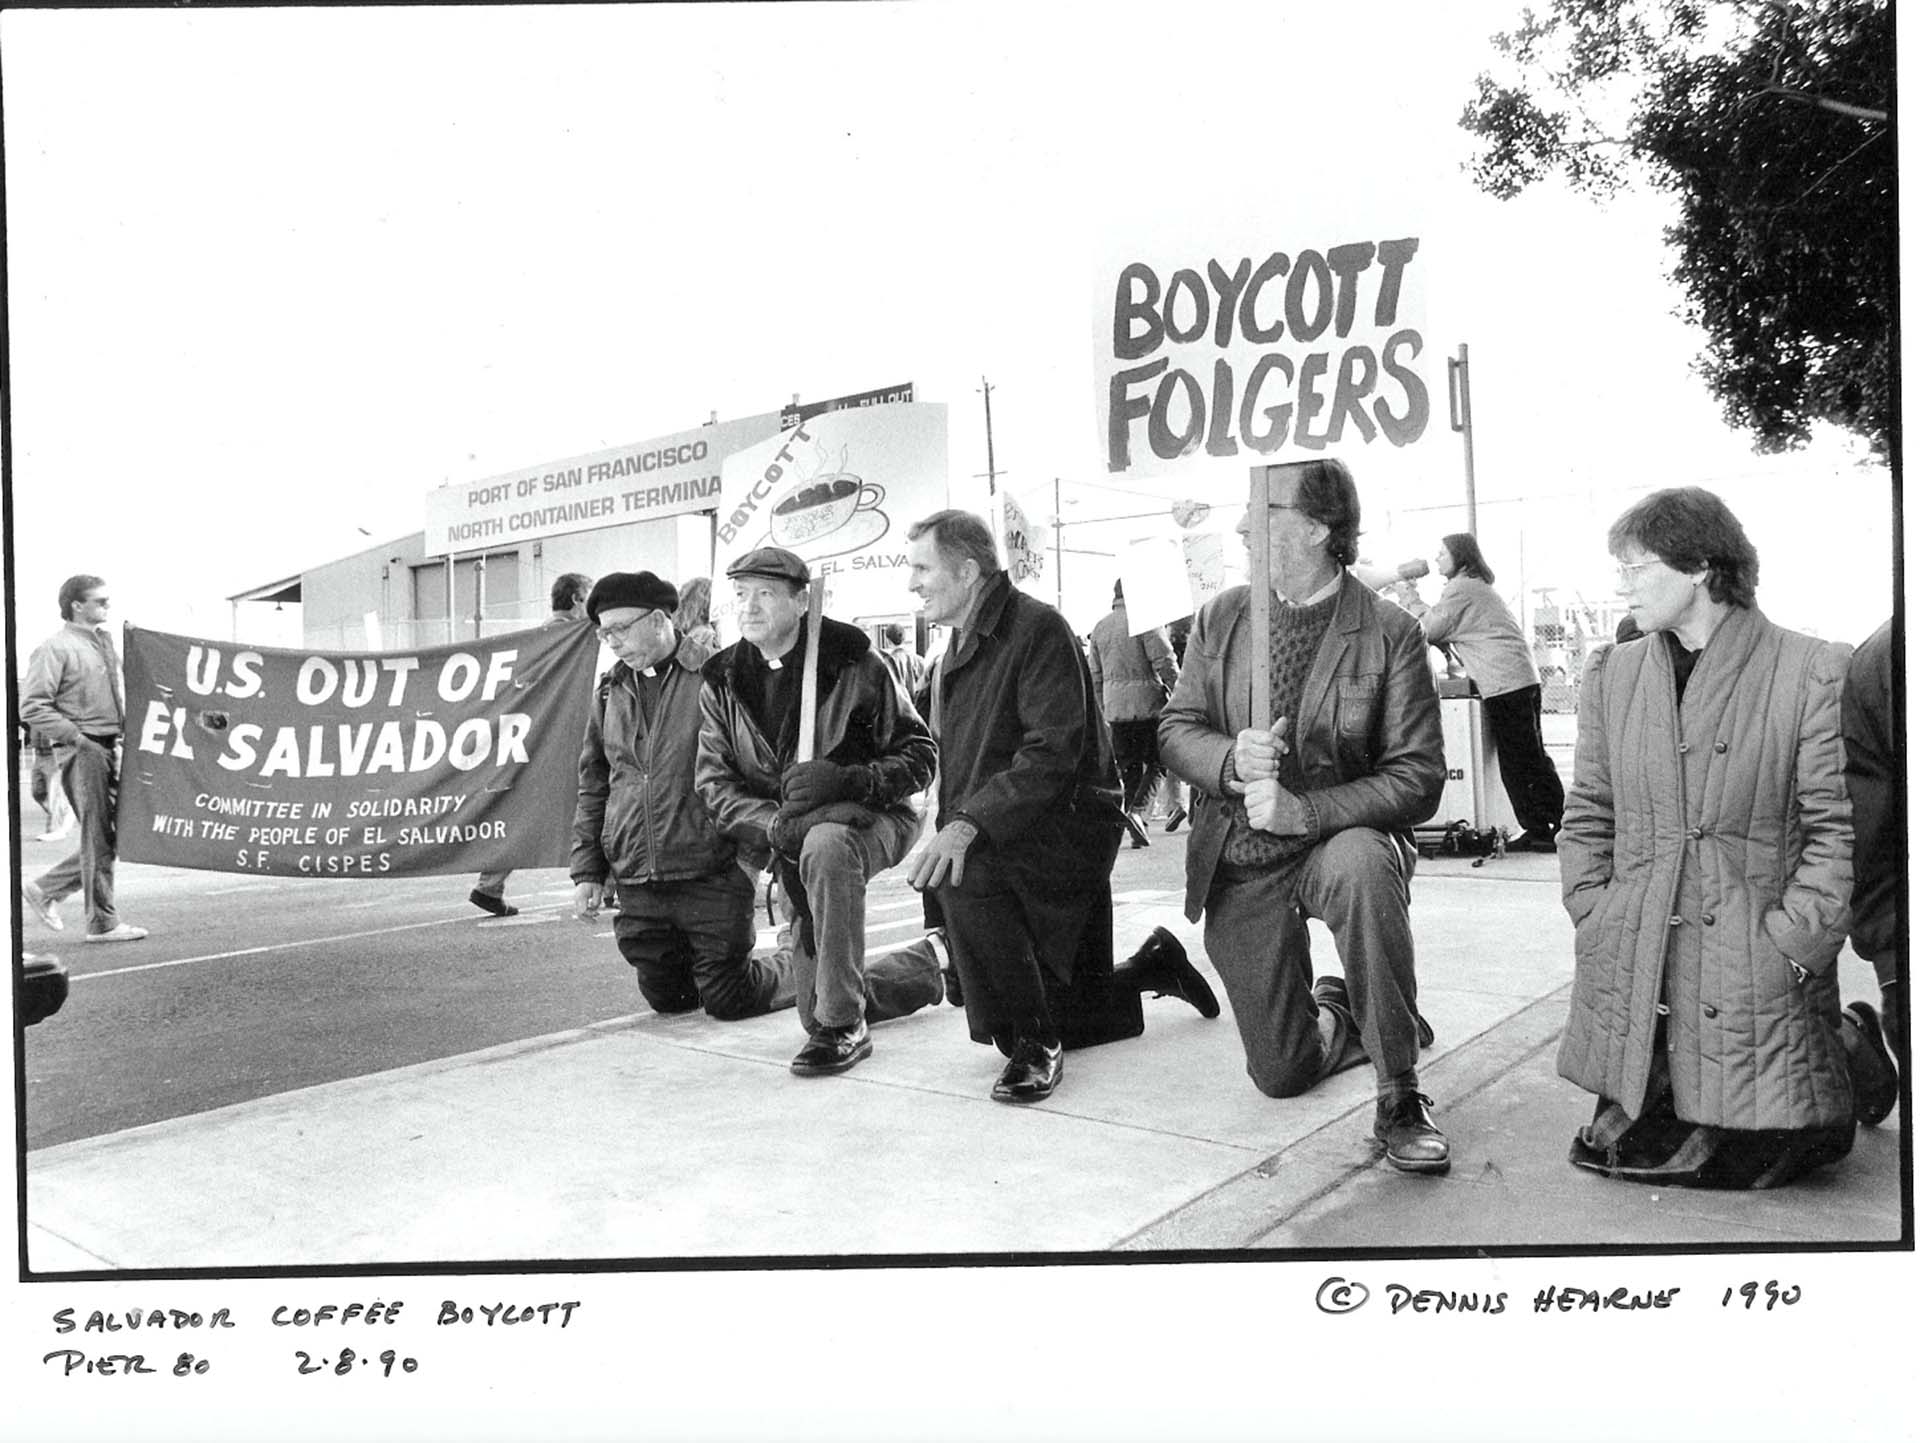 Black-and-white image of protestors taking a knee, holding signs that read, "Boycott Folgers" and "U.S. Out of El Salvador."